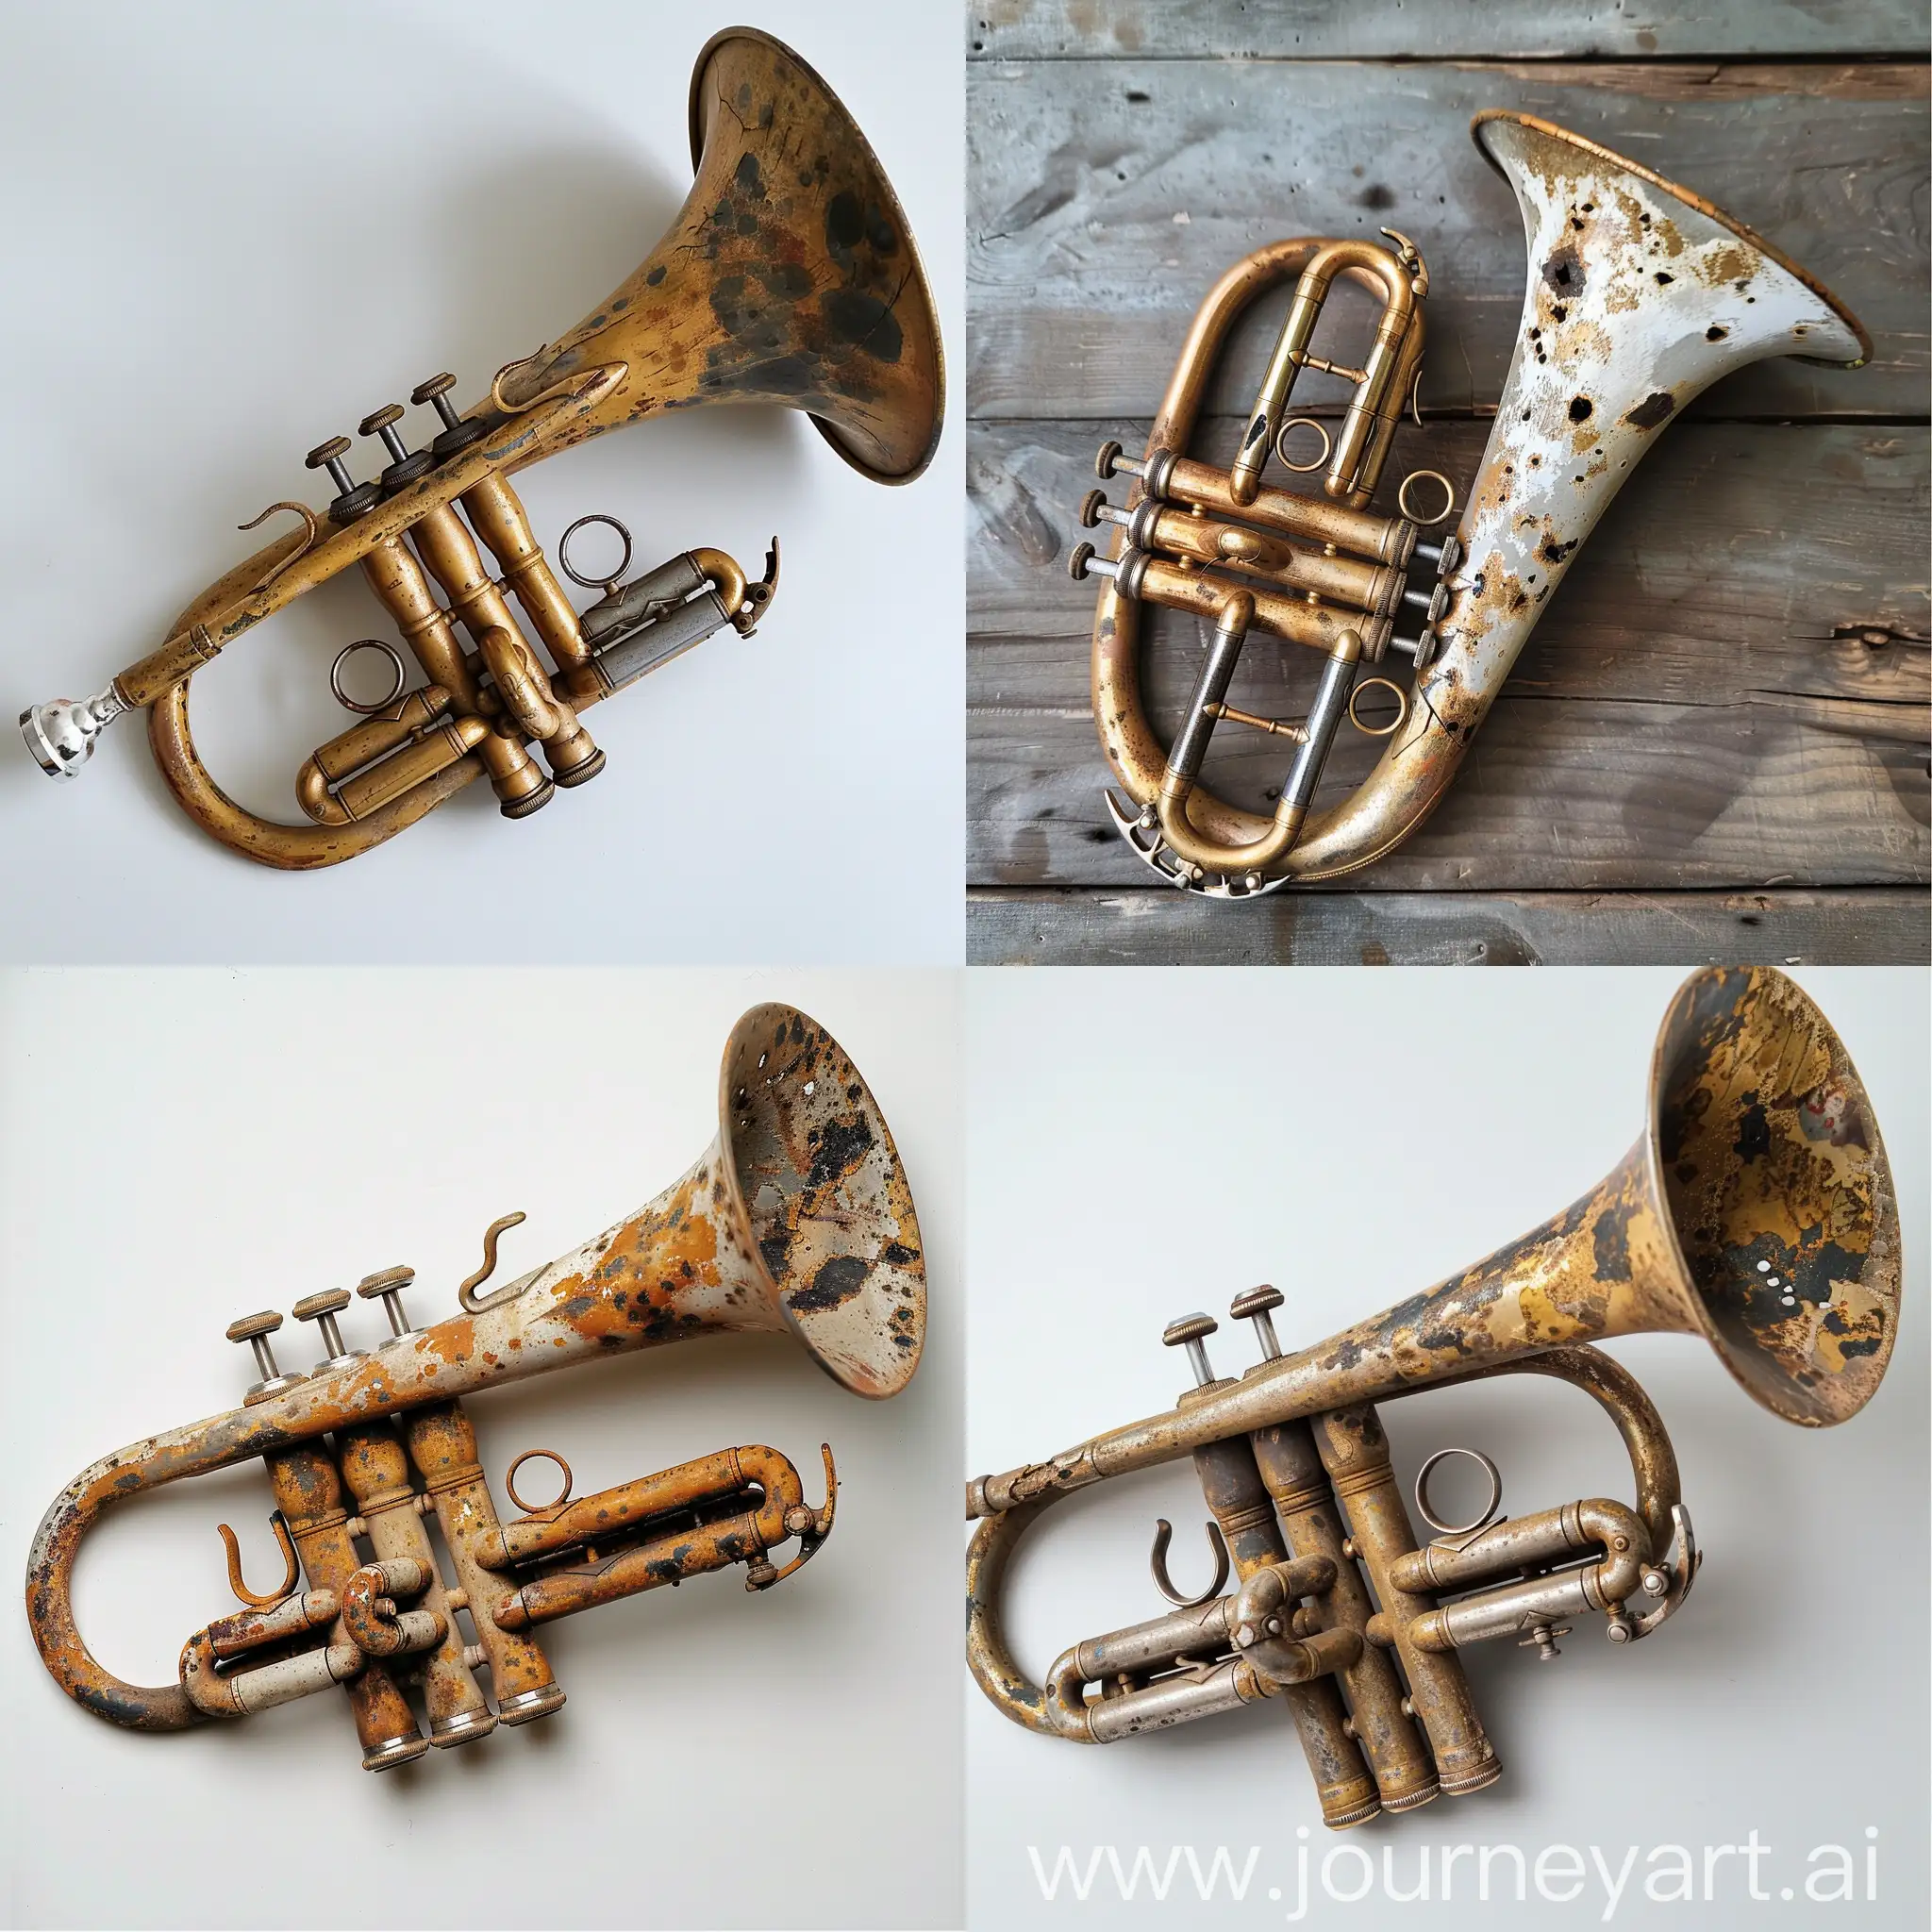 generate  a broken trumpet for a body. The trumpet's bell is dented and bent, with a few holes scattered across its surface. Despite its flaws, it exudes personality and charm